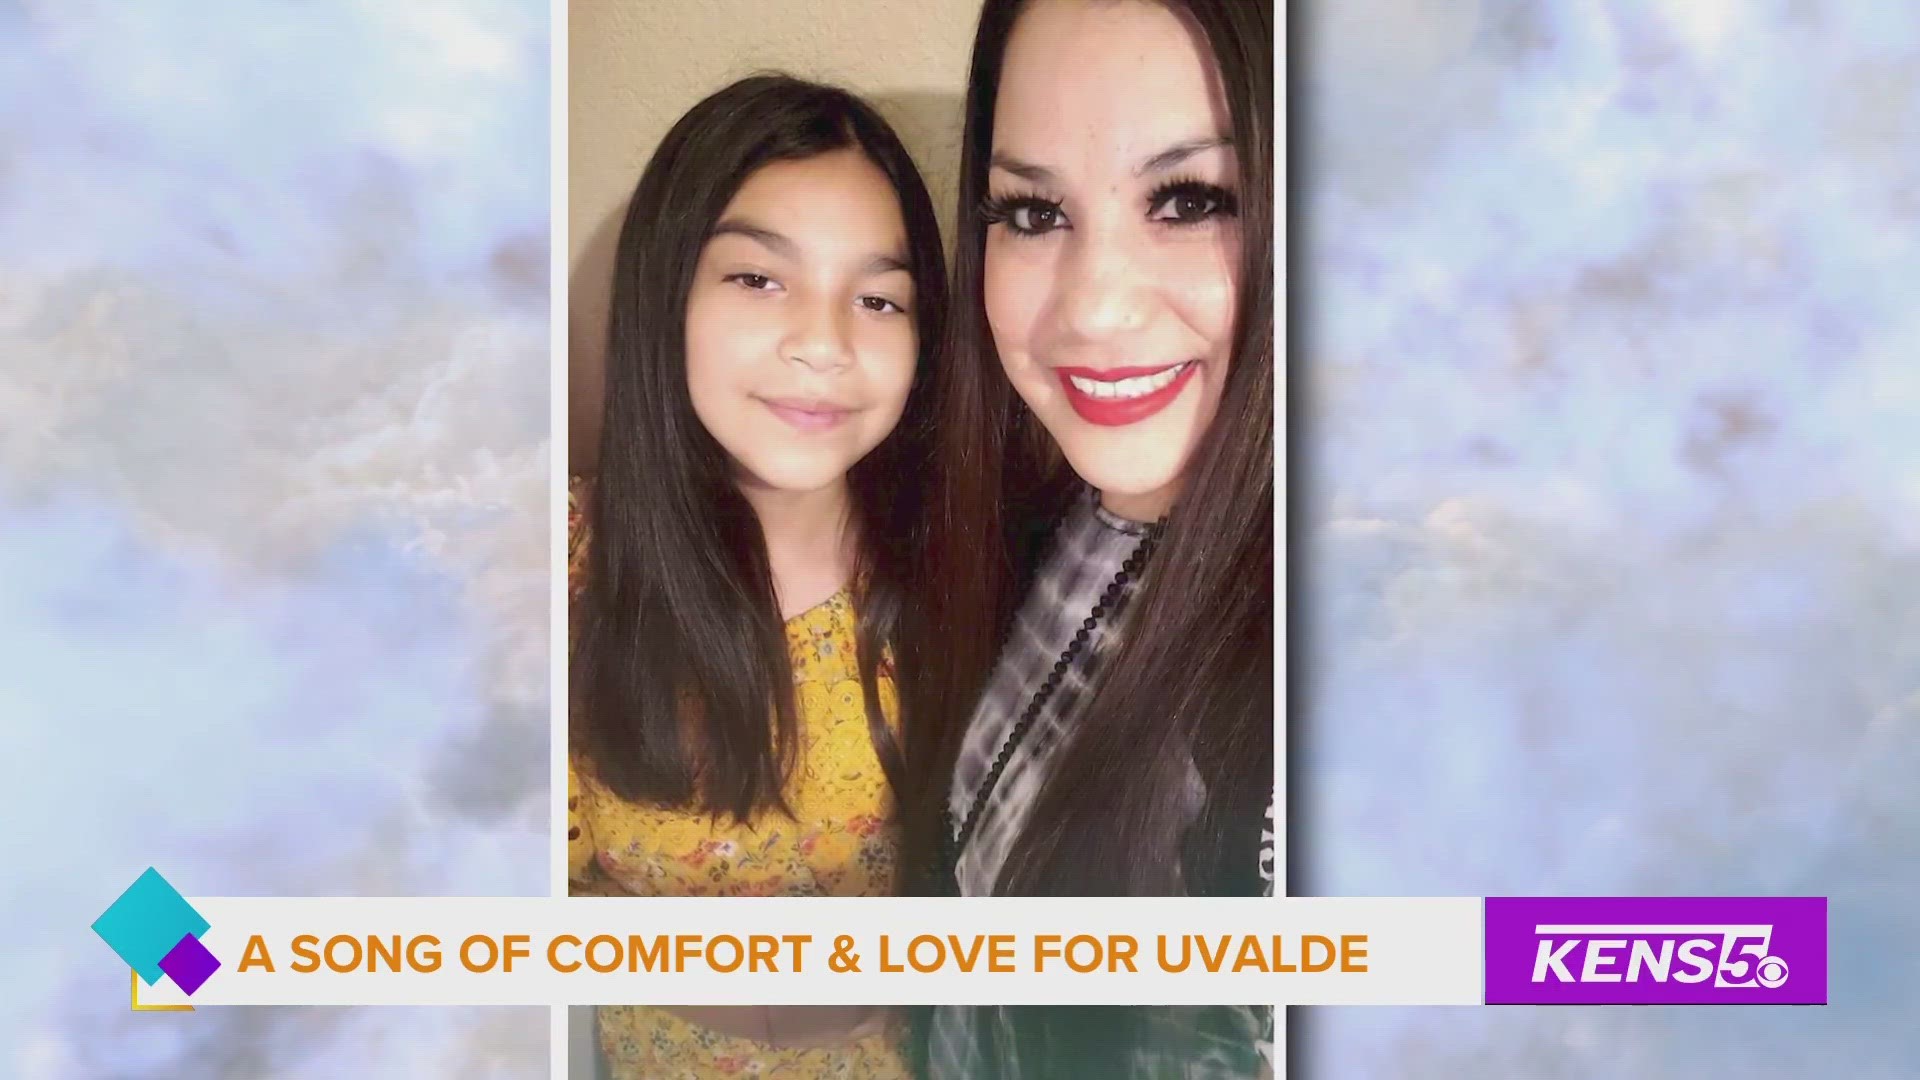 Roma spoke with Sandra Torres, the mother of one of the victims of Uvalde, and musician Jay Dominguez about a song that connects them both.